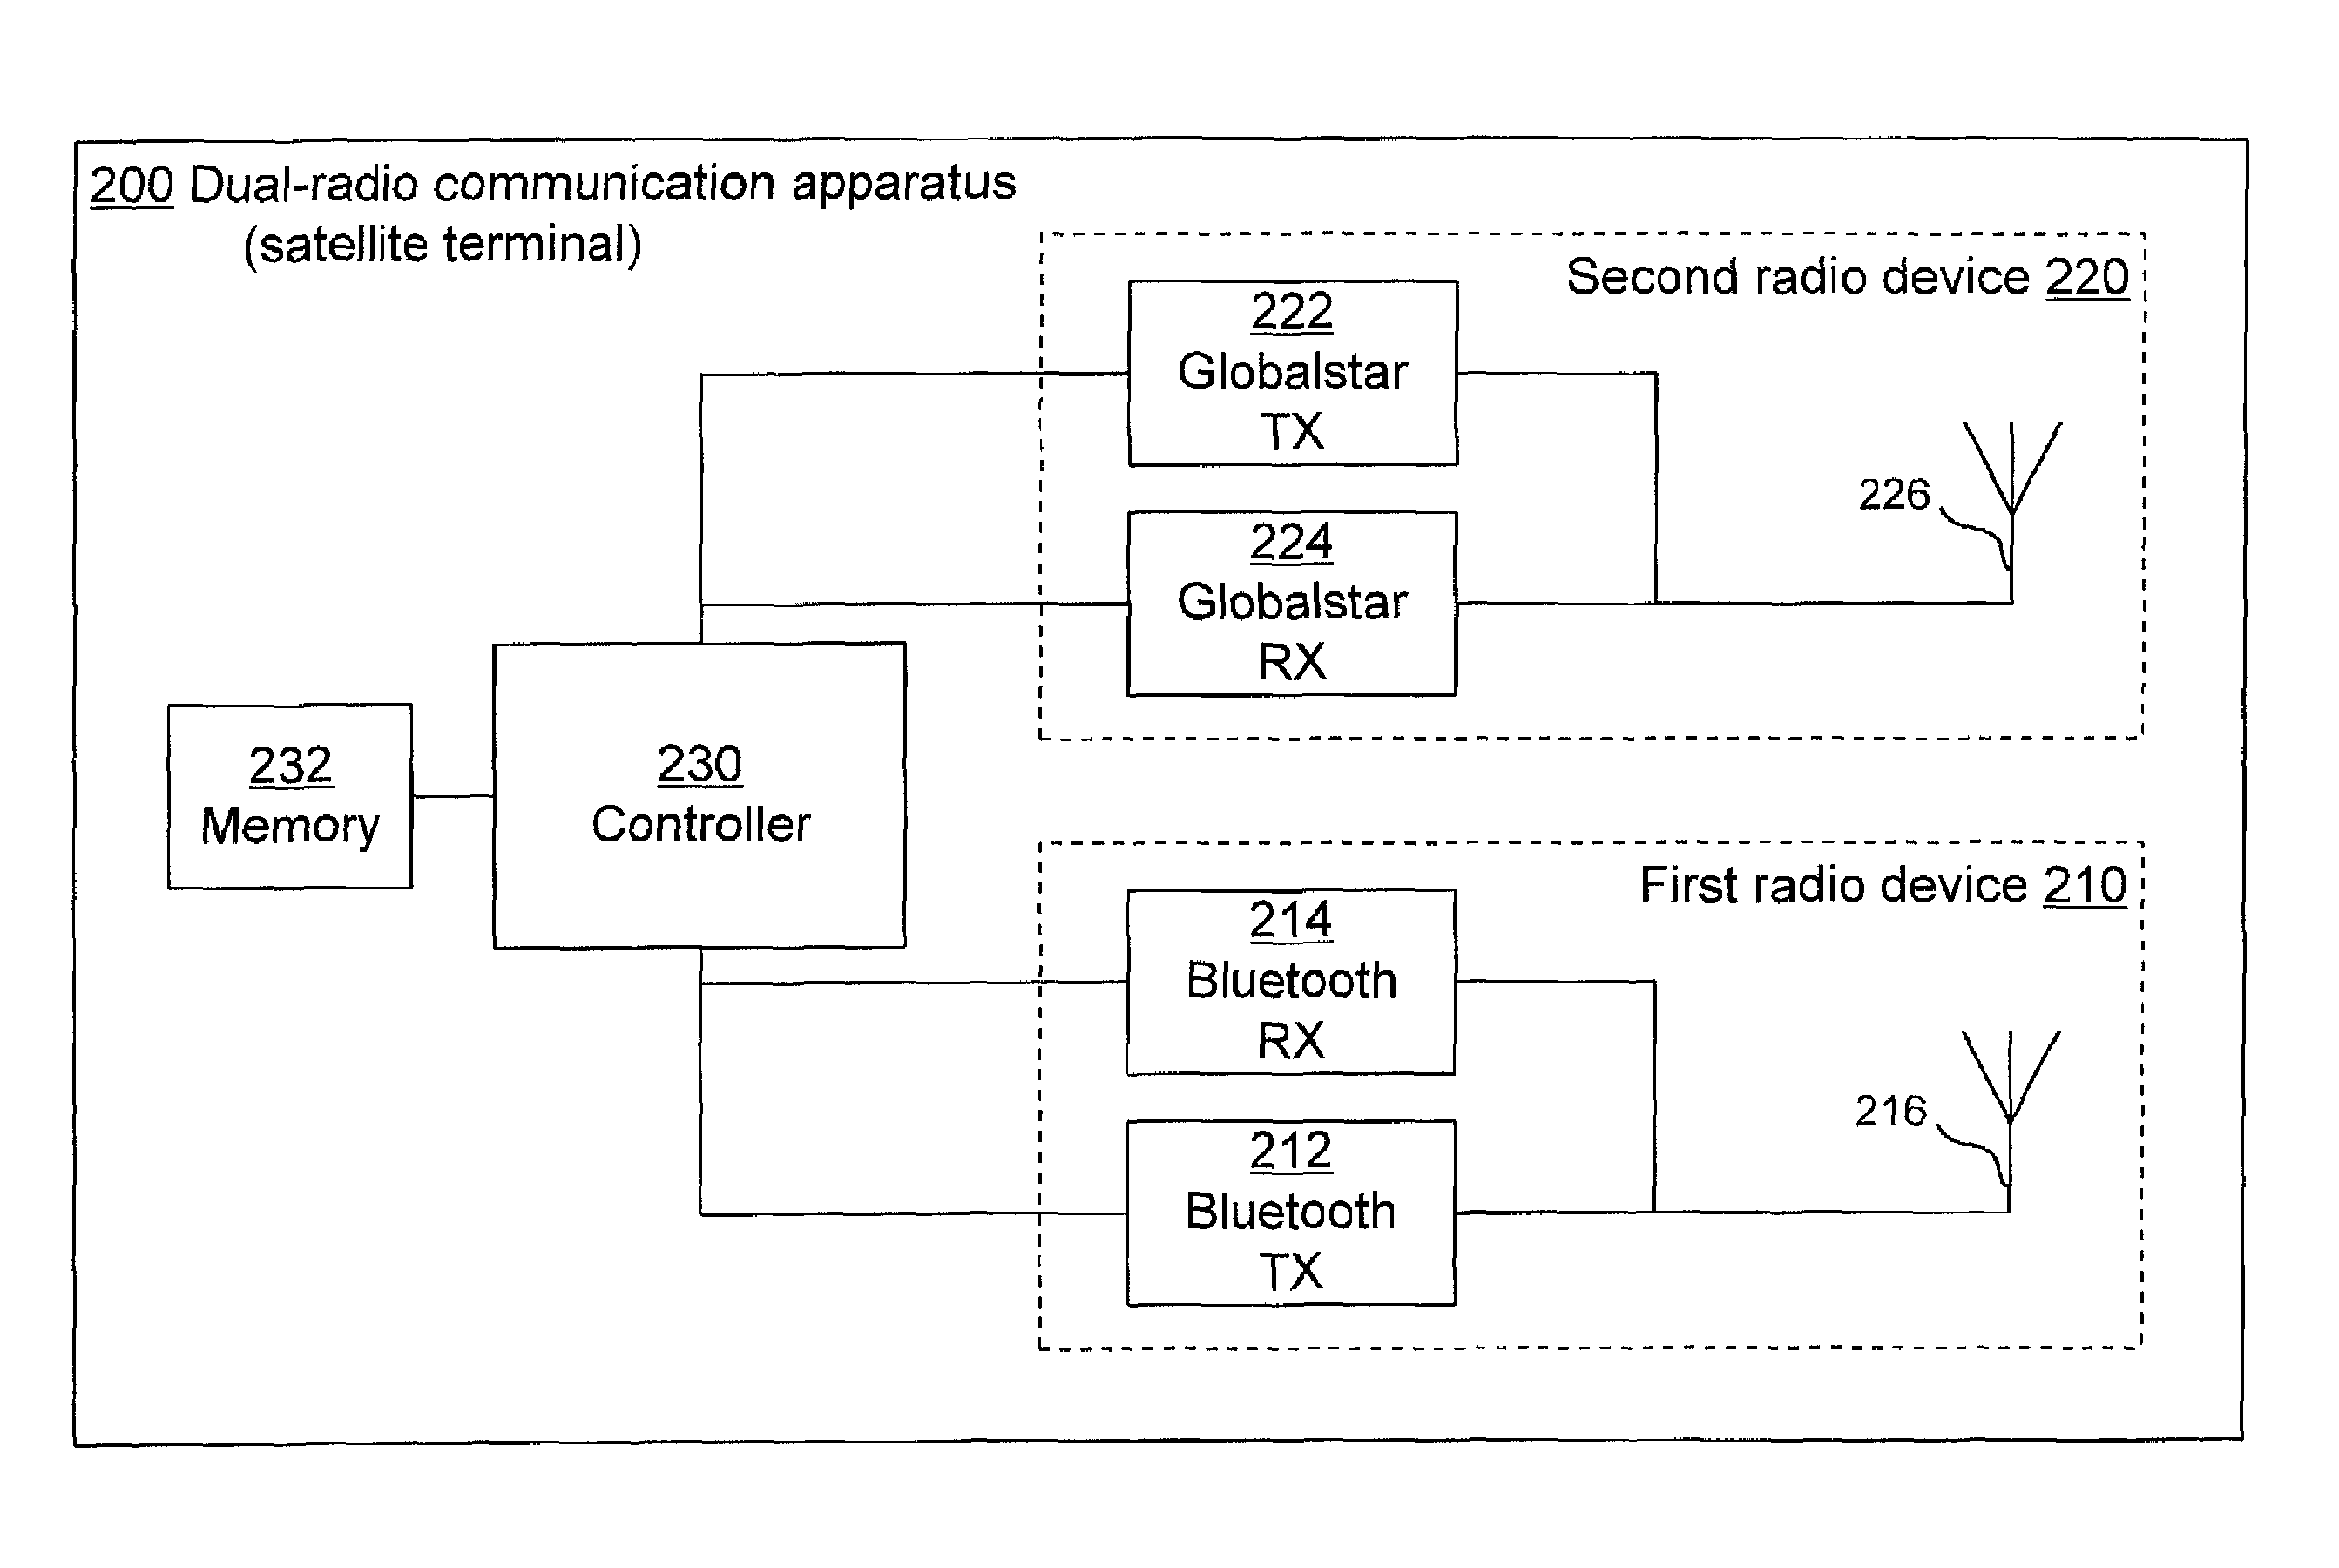 Dual-radio communication apparatus, and an operating method thereof